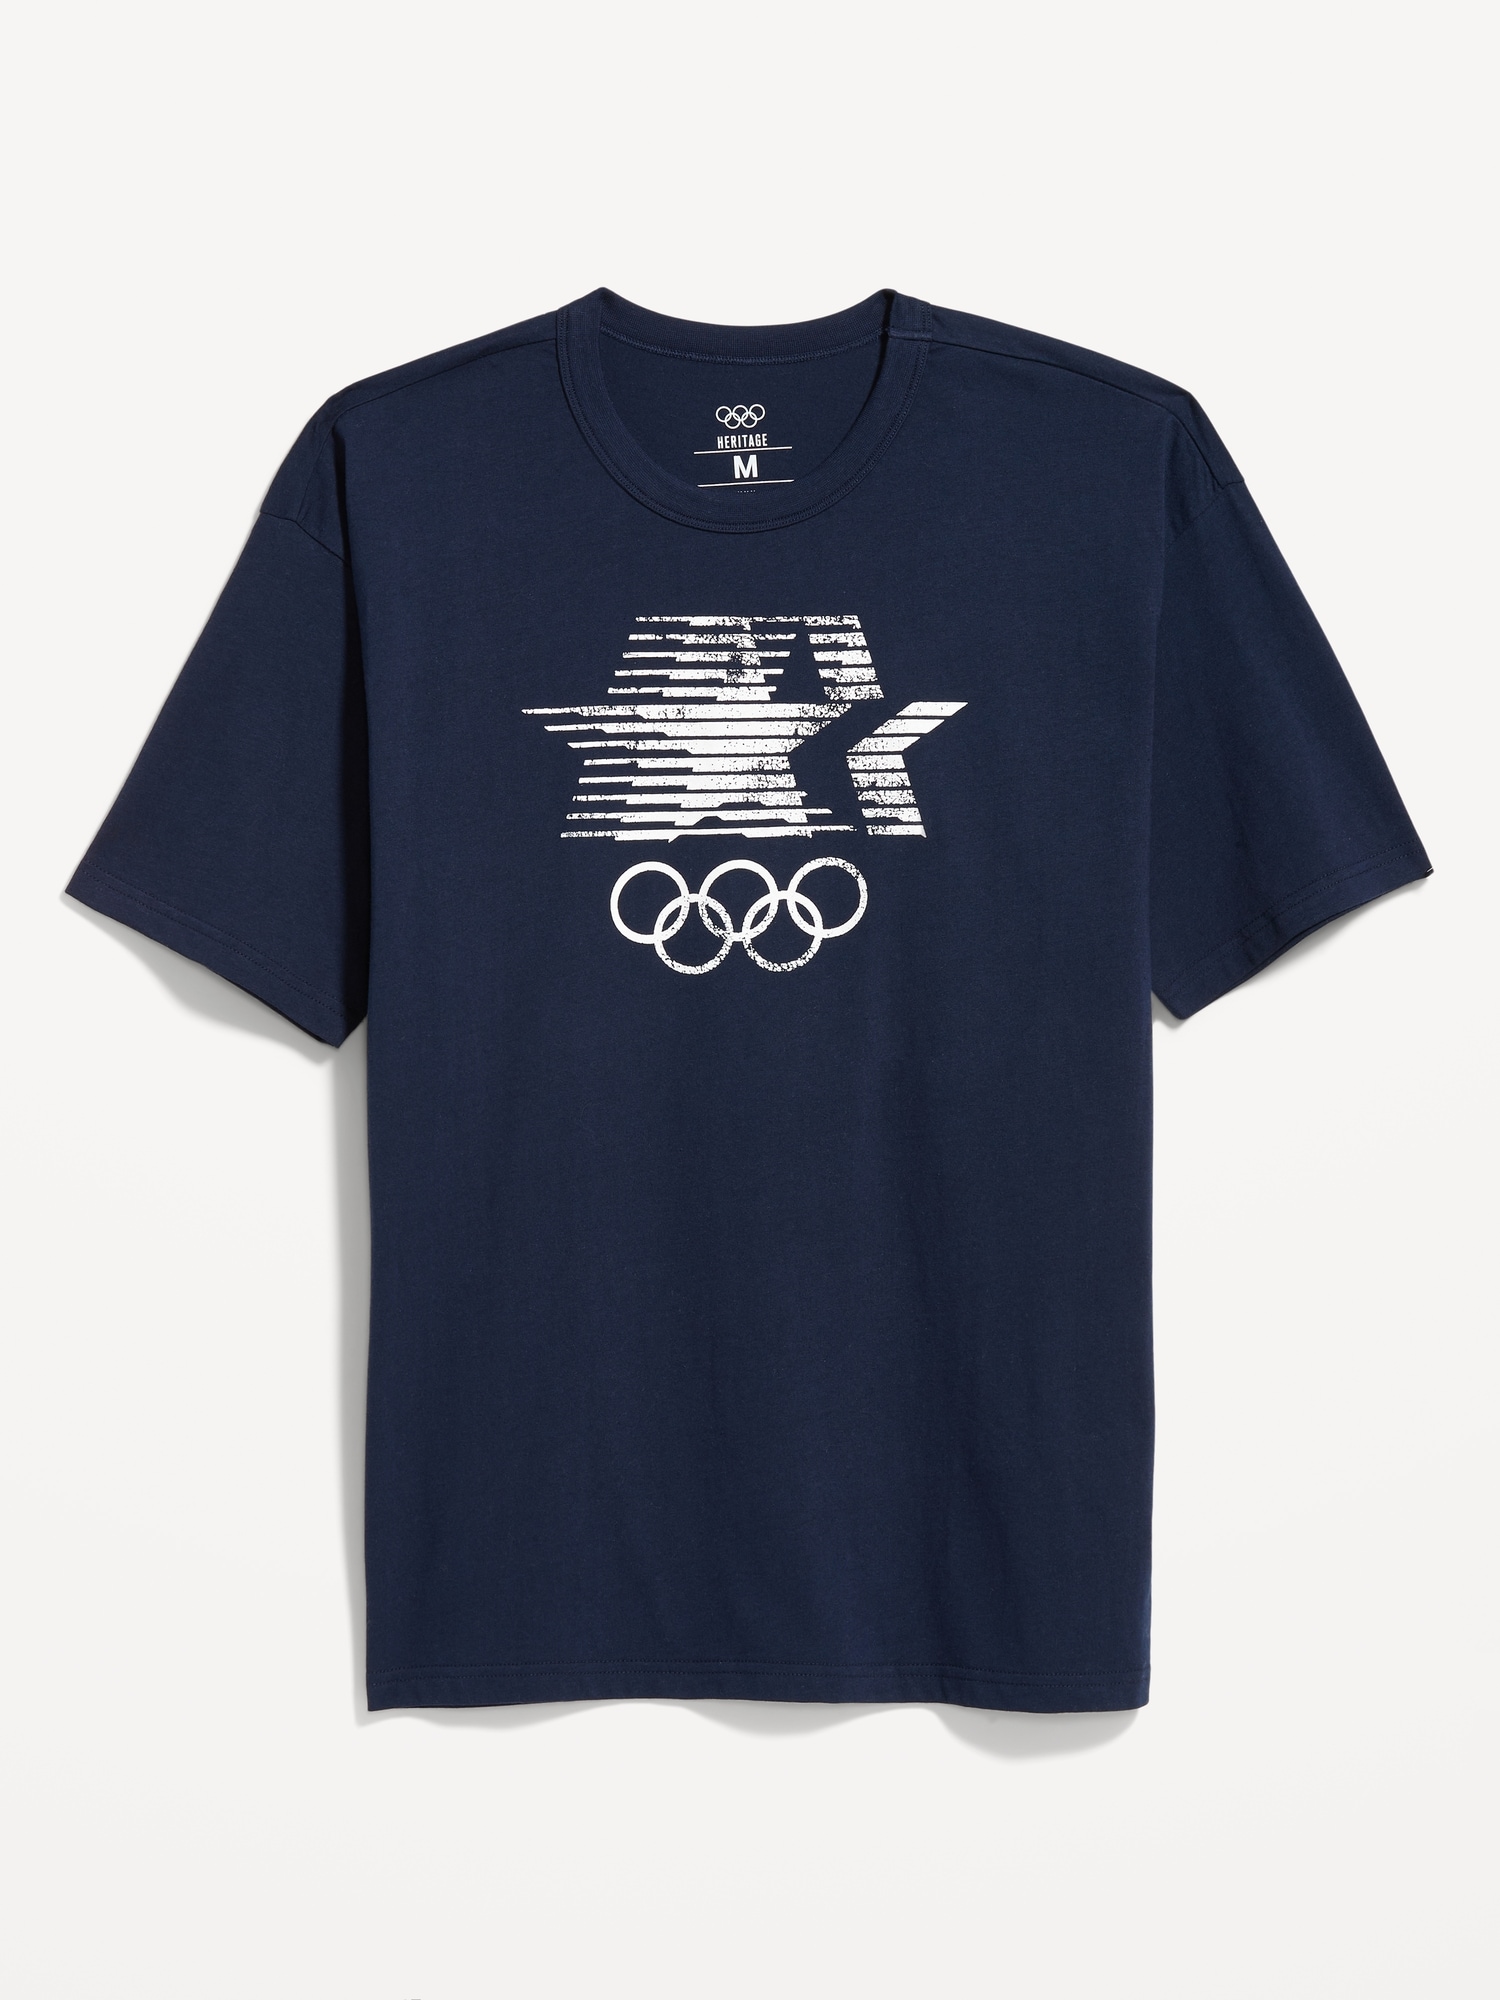 Team USA© Gender-Neutral Loose T-Shirt for Adults